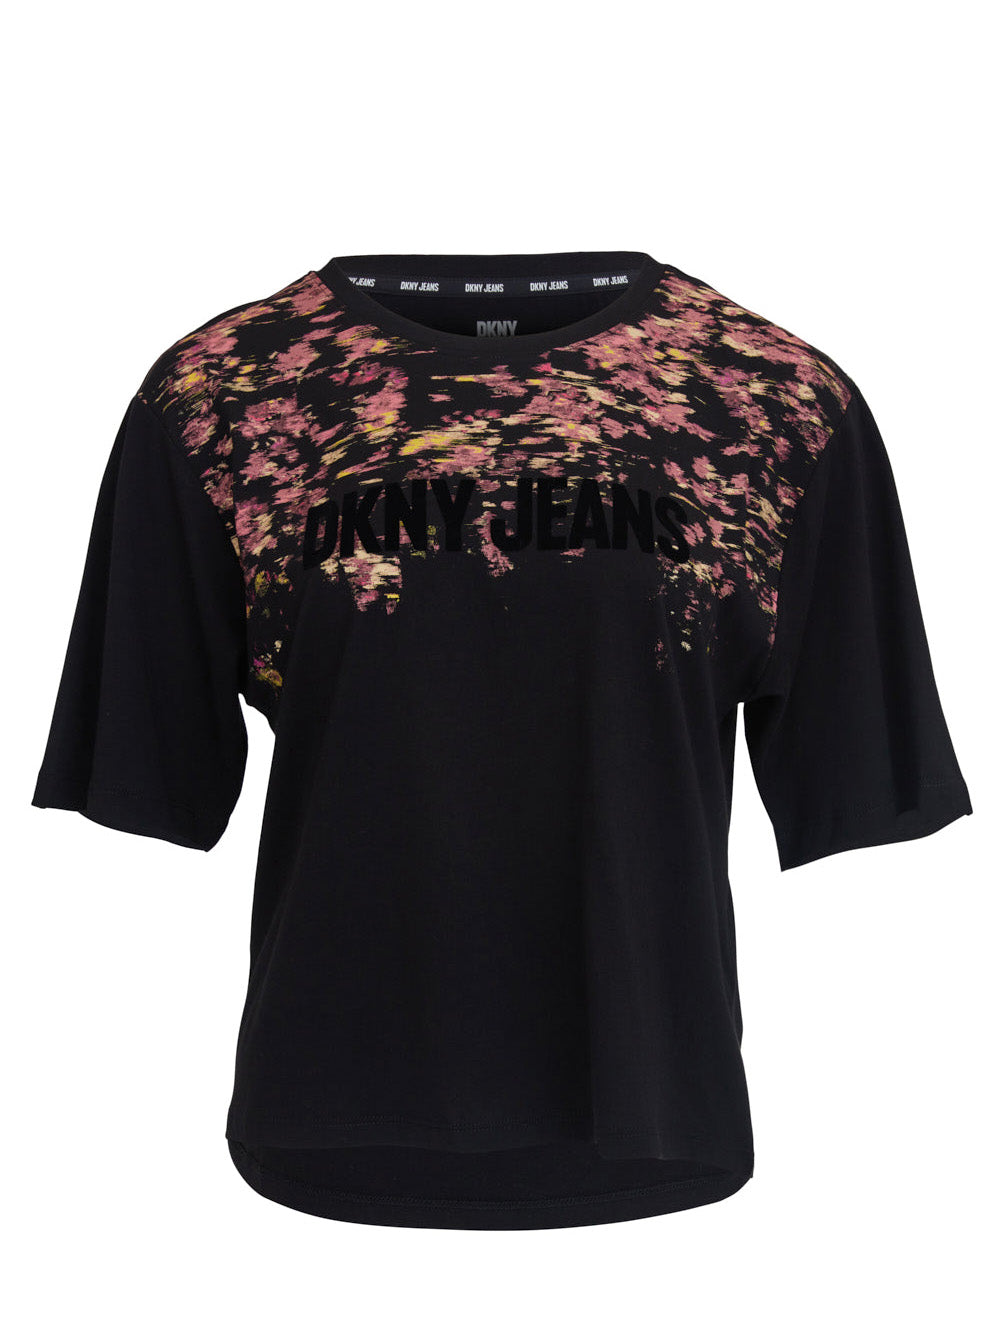    DKNY-Jeans-Cotton-Modal-Jersey-Printed-Tee-Black-1